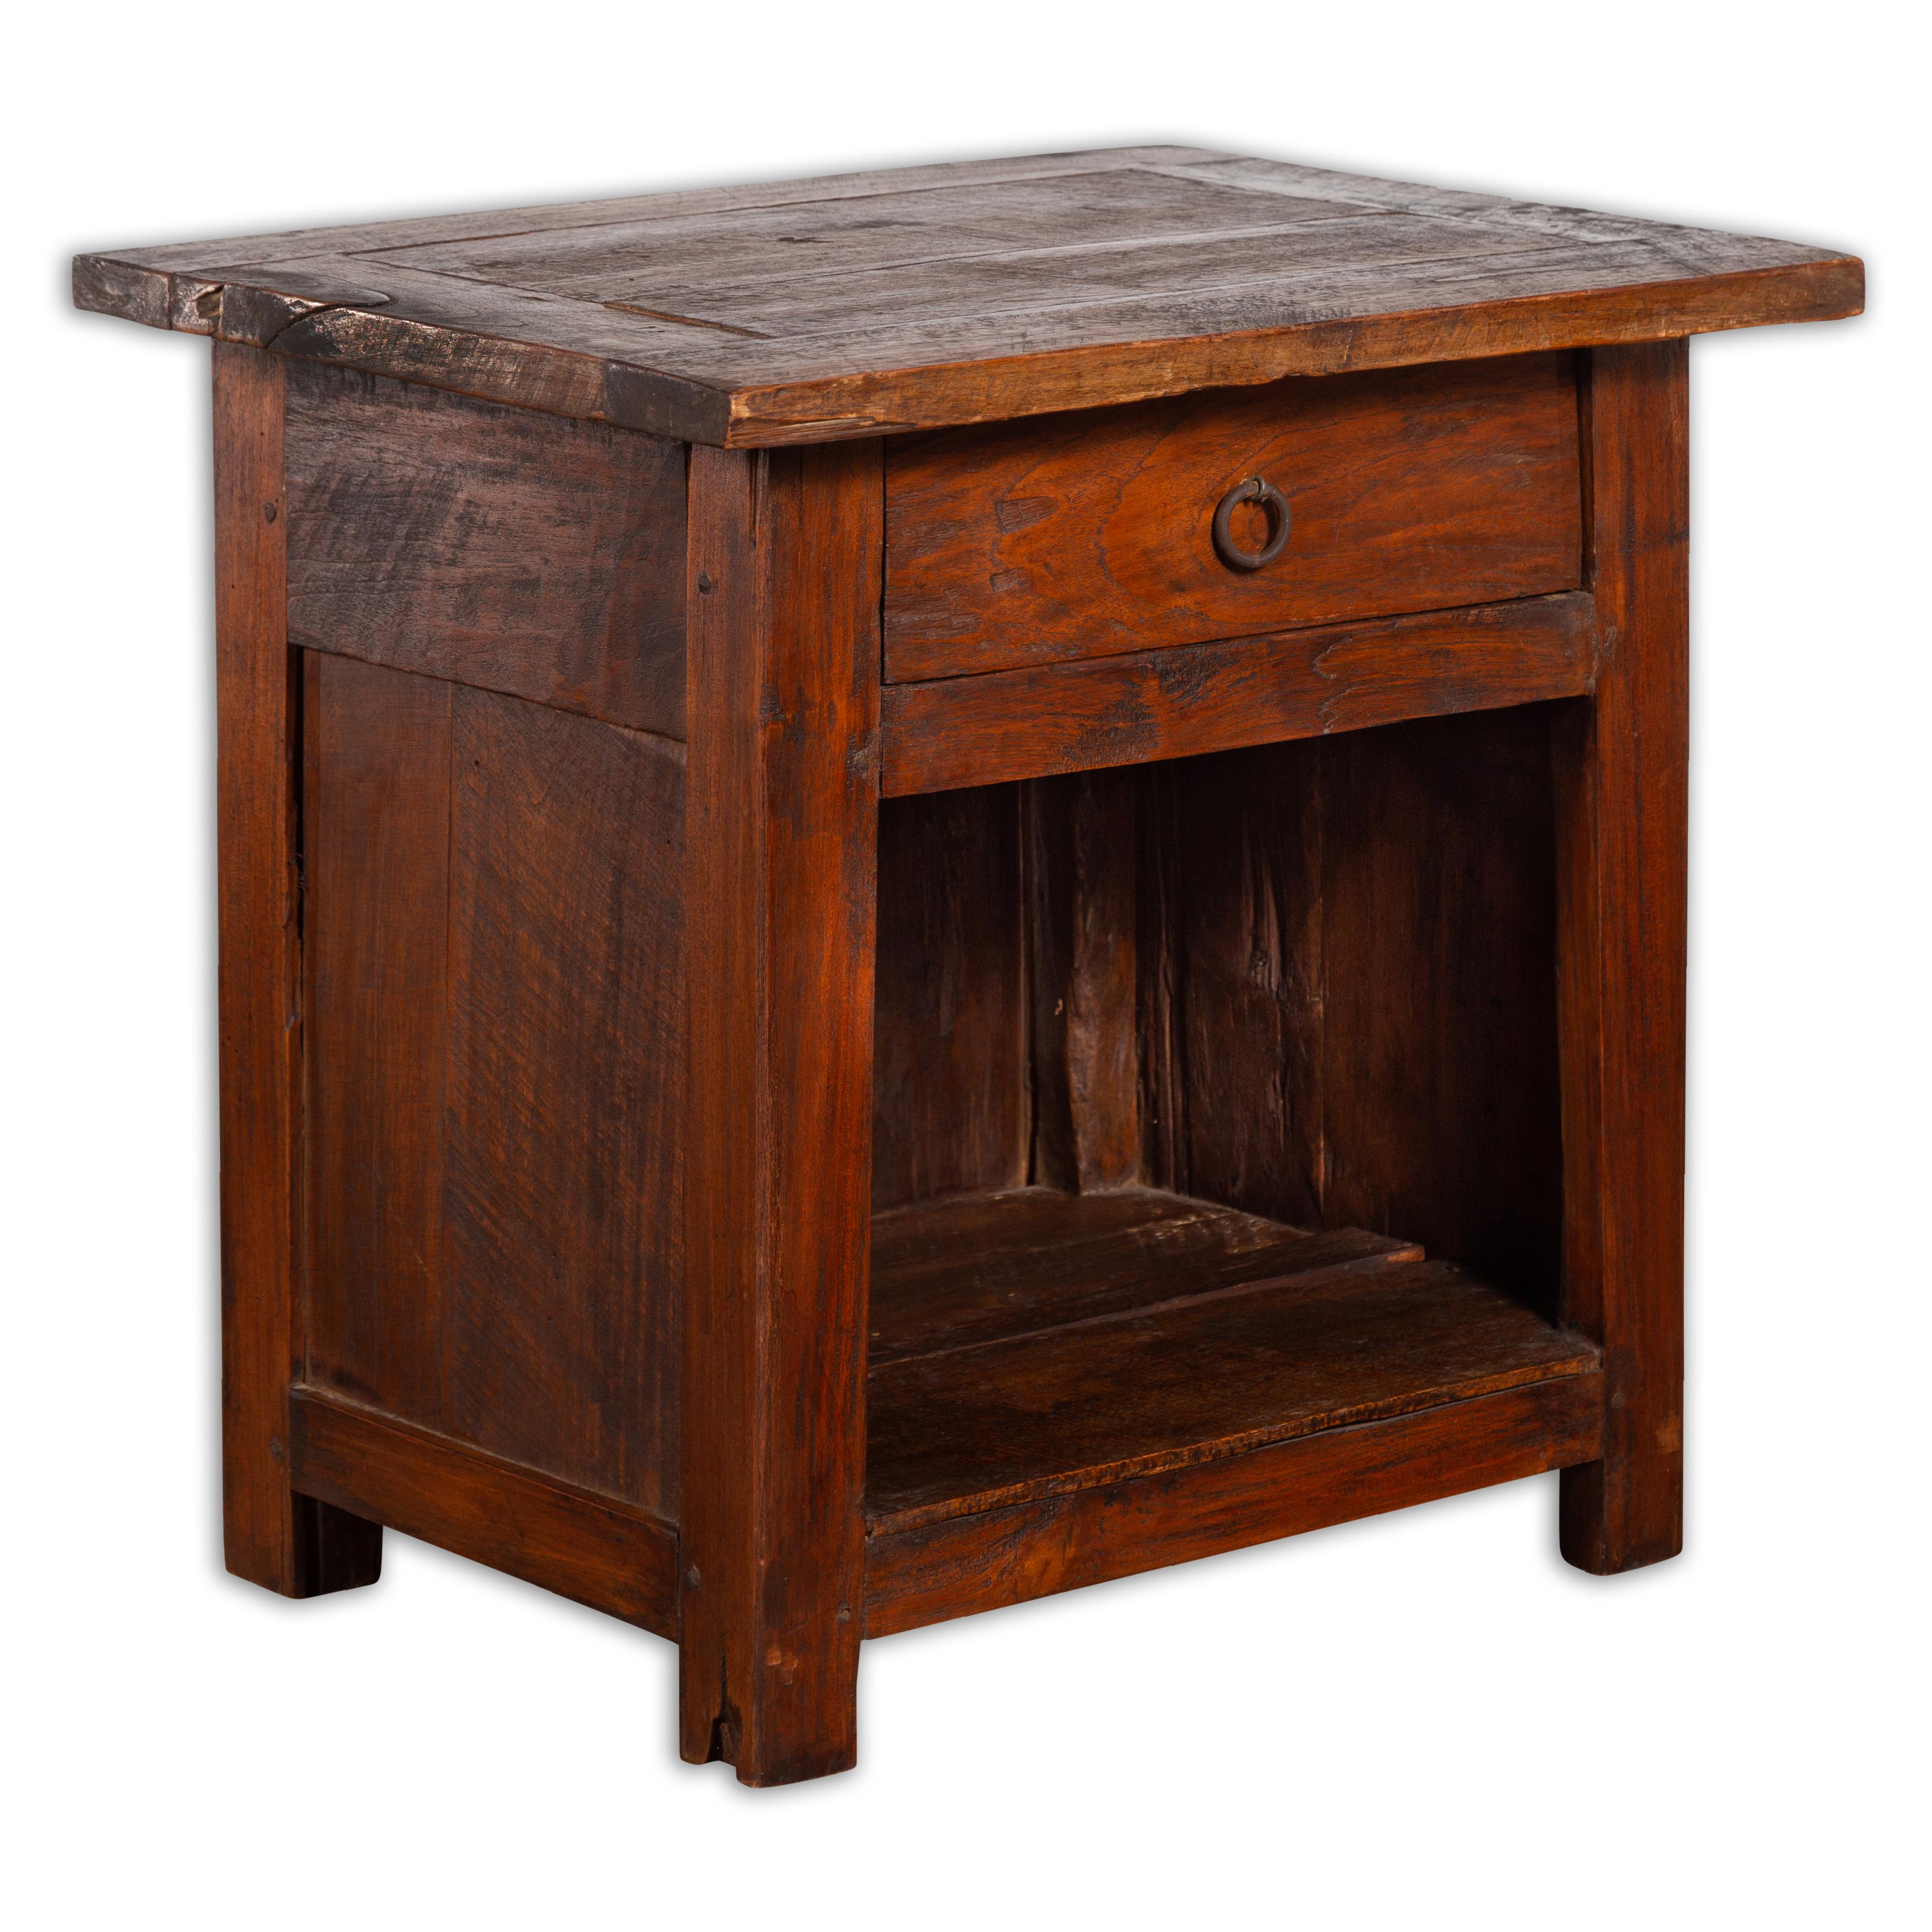 Javanese Early 20th Century Rustic Bedside Cabinet with Drawer and Open Shelf For Sale 8